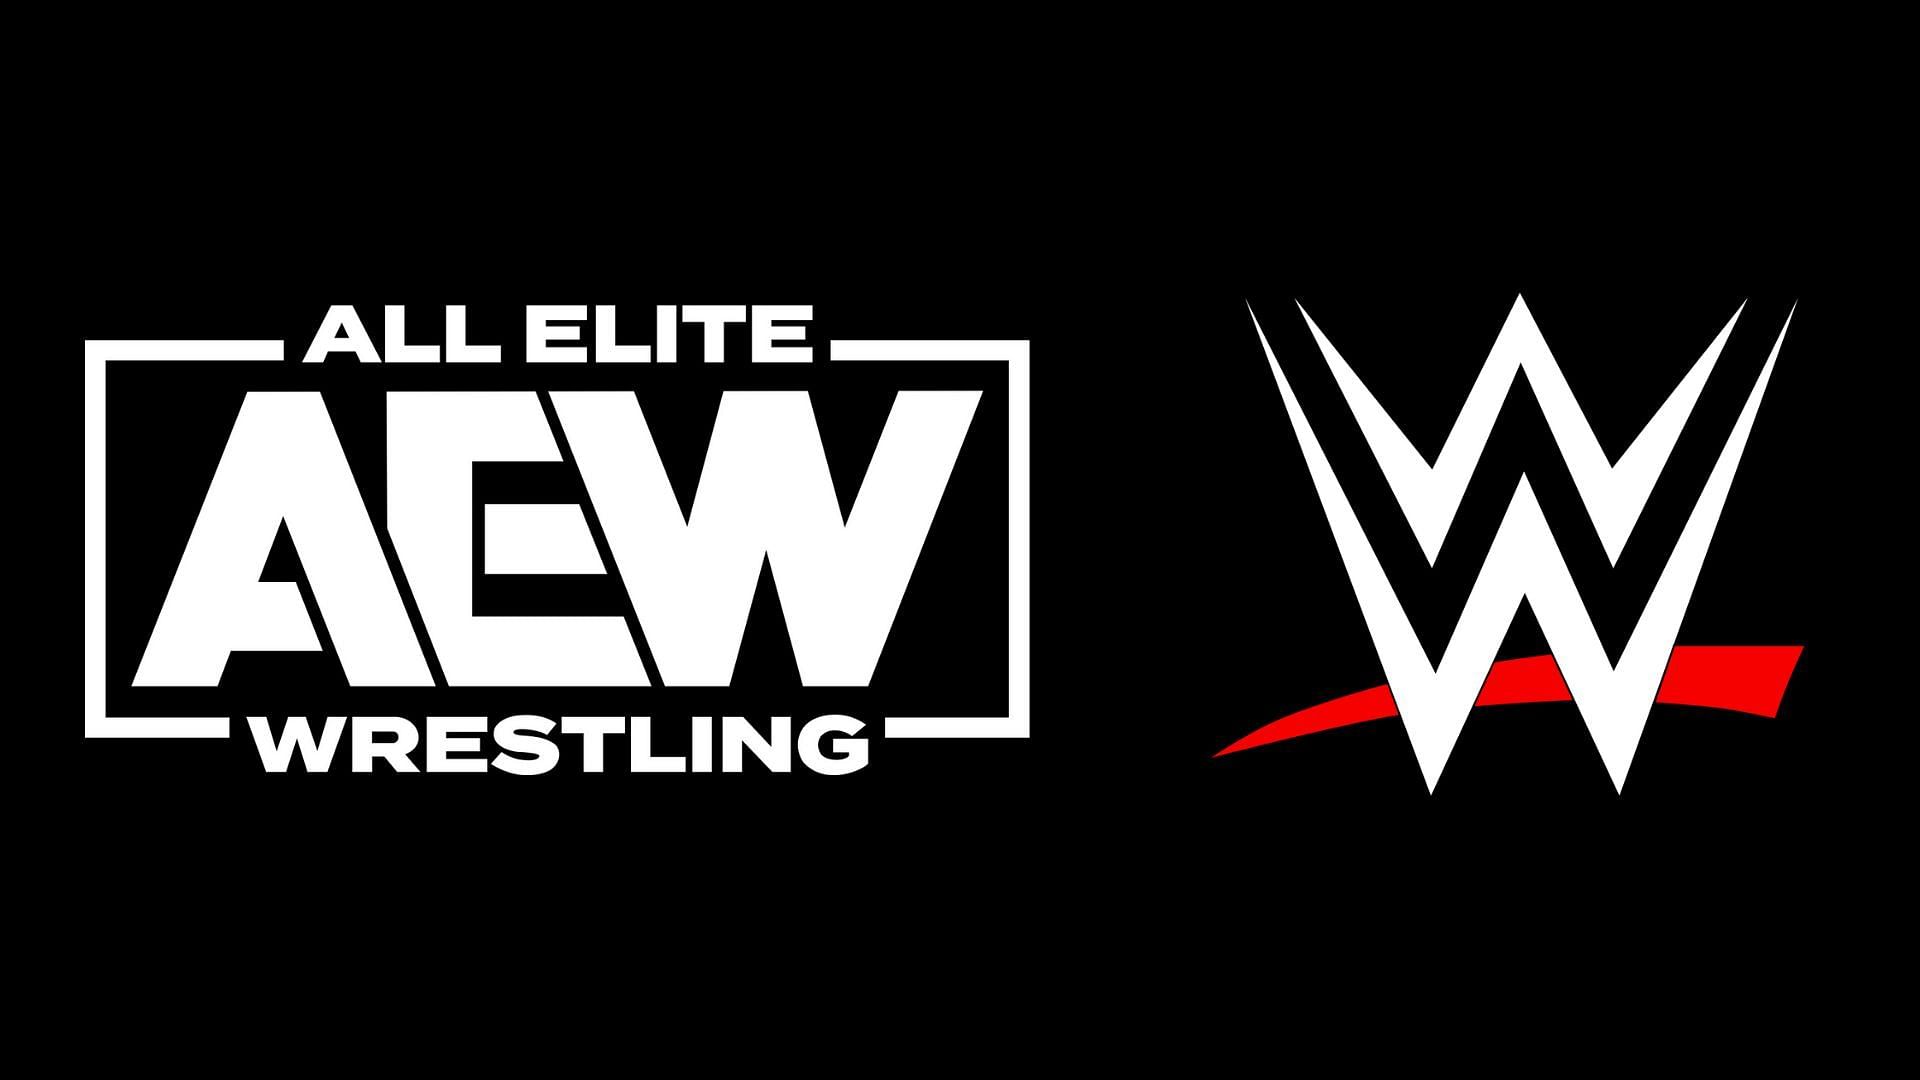 Could this star end up jumping to WWE instead of re-signing with AEW?